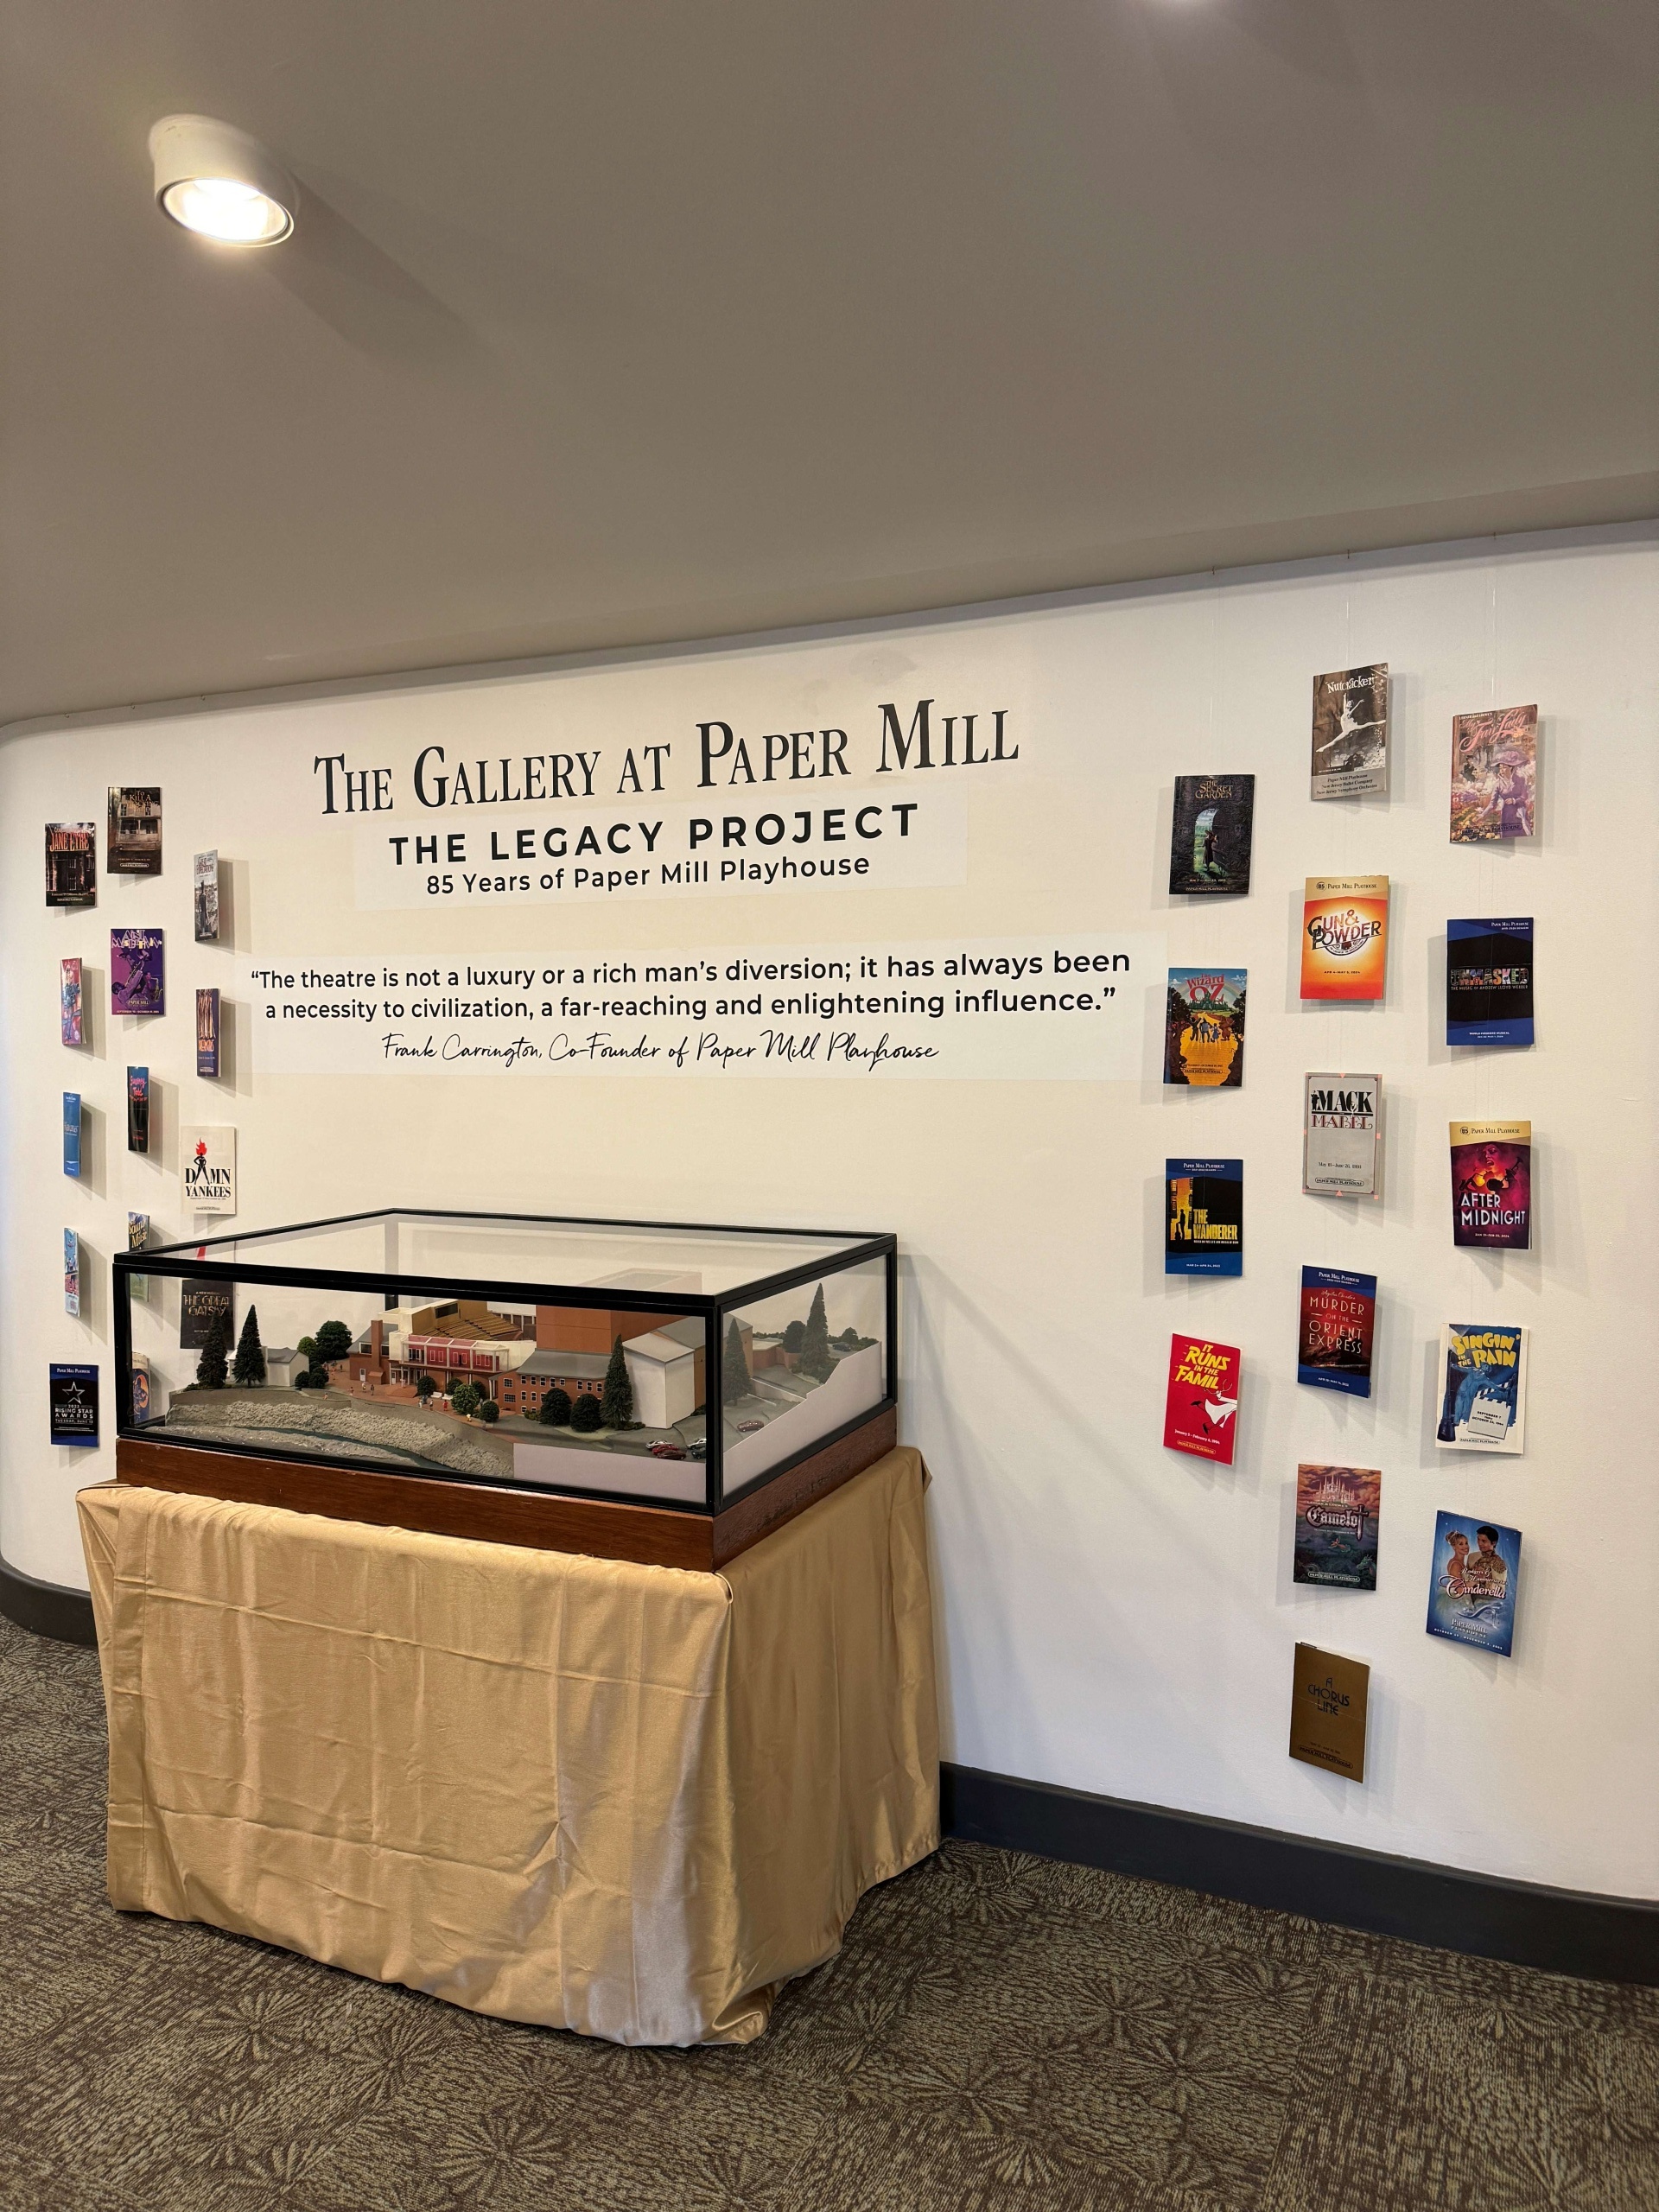 A model of the theater sits in front of a with programs hanging on the left and right. The Gallery at Paper Mill; The Legacy Project is in the center of the wall.